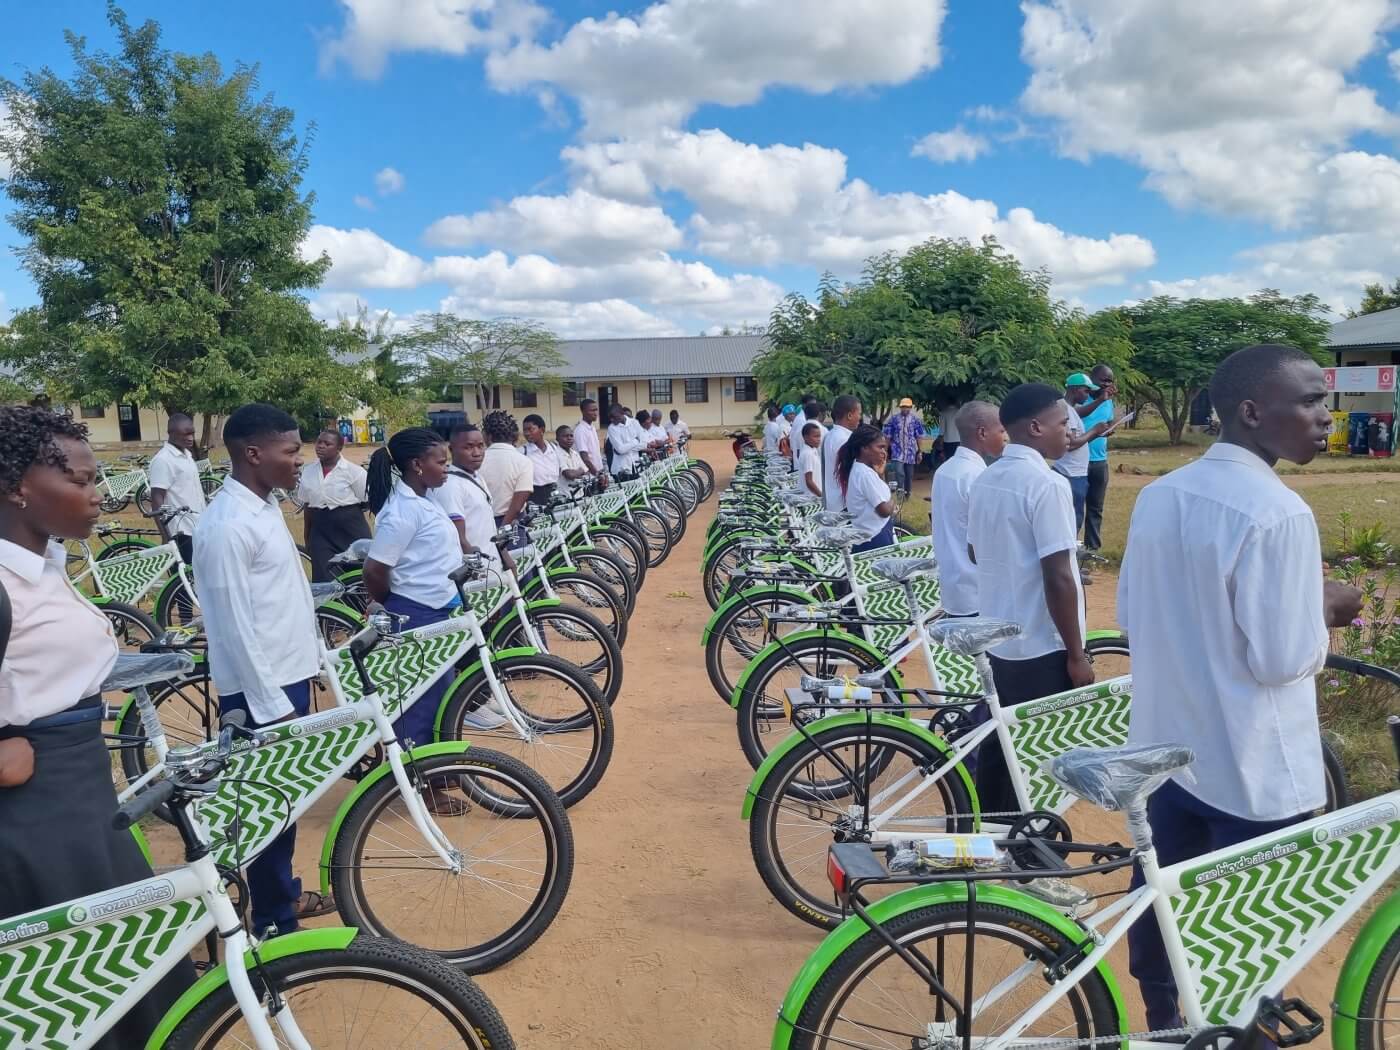 A group of young students wearing white shirts and black pants stand next to a line of green and white Mozambikes bicycles with baskets on the front, parked on a dirt road with trees and a single-story building with a red roof in the background. The sky is blue with white clouds.